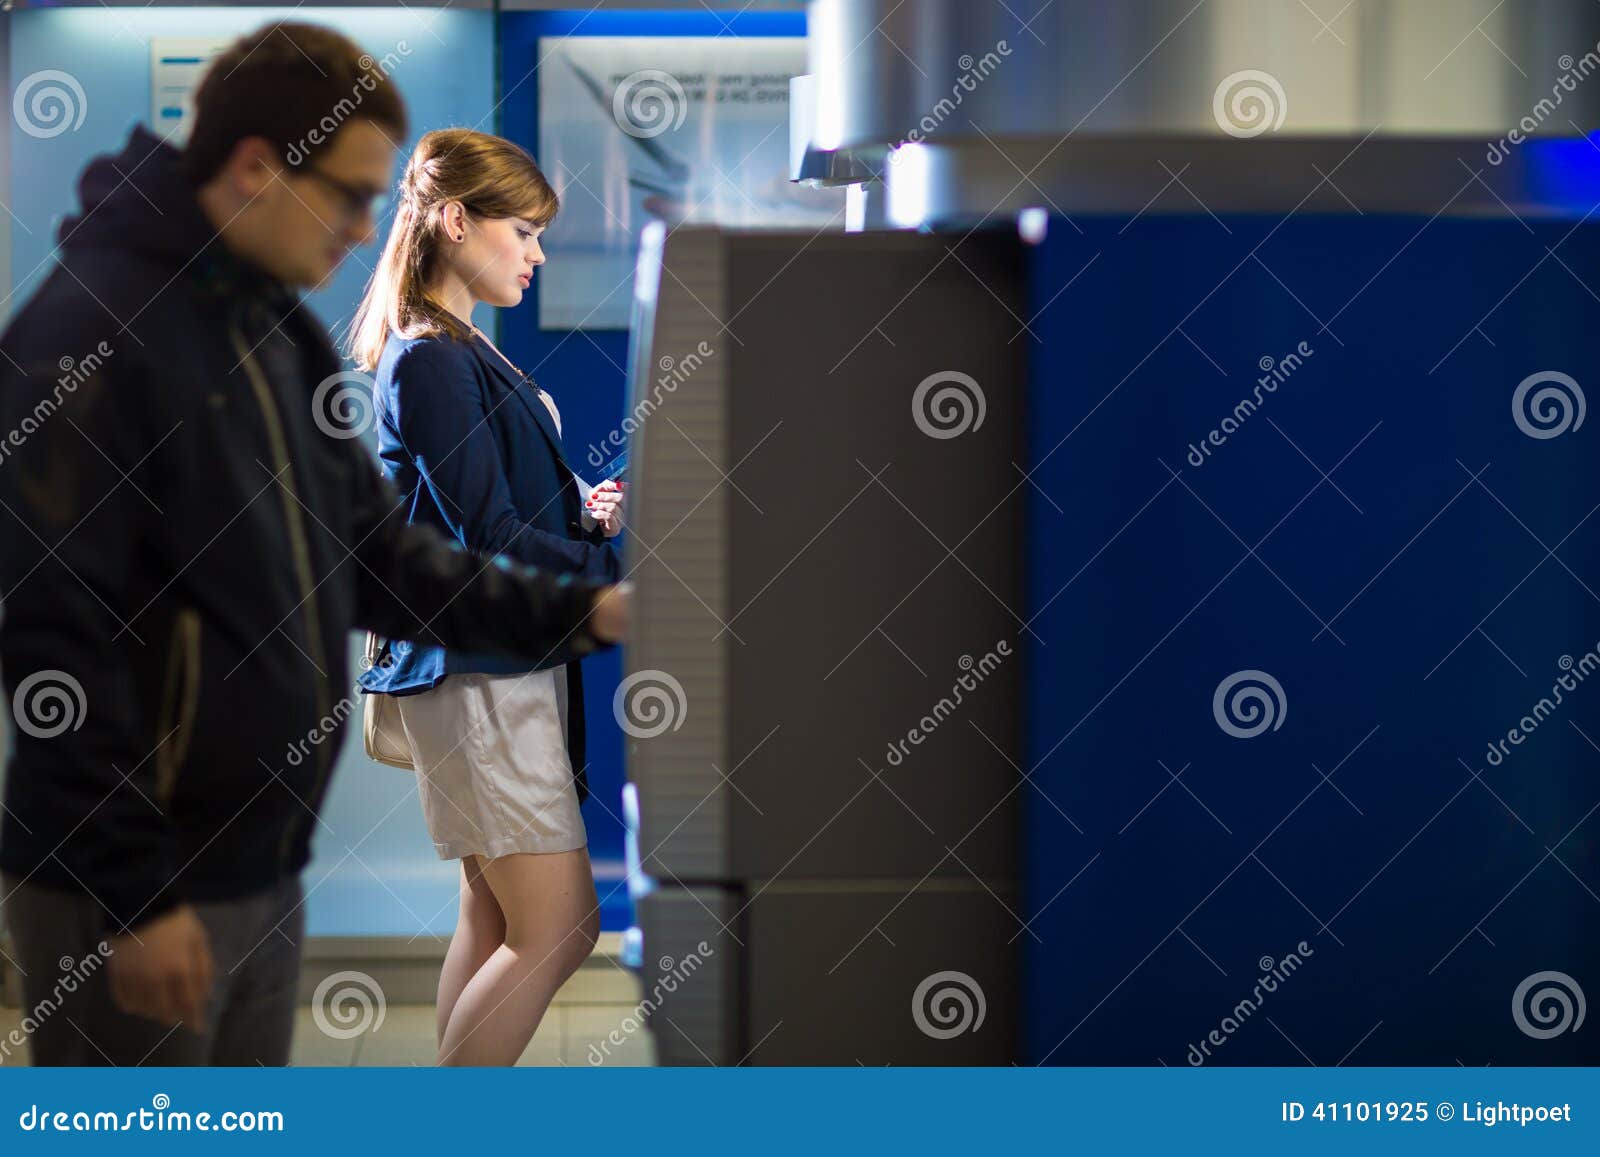 pretty, young woman withdrawing money from her credit card